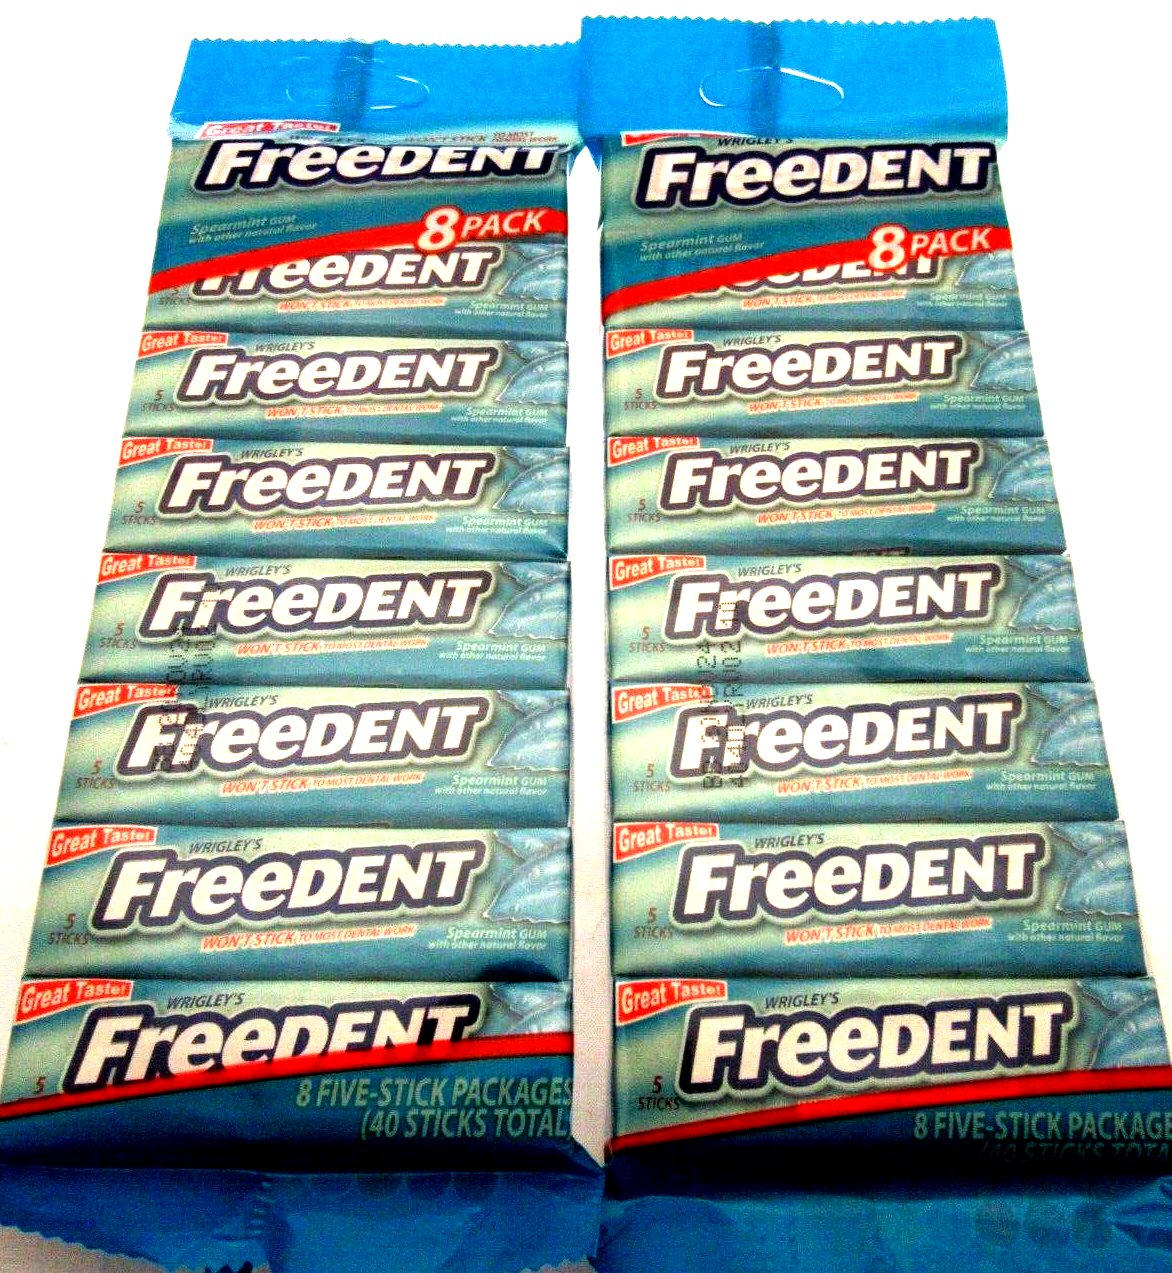 Wrigley's Freedent Gum 8 pack Spearmint 40 Sticks candy ~ Lot of 2 Minty